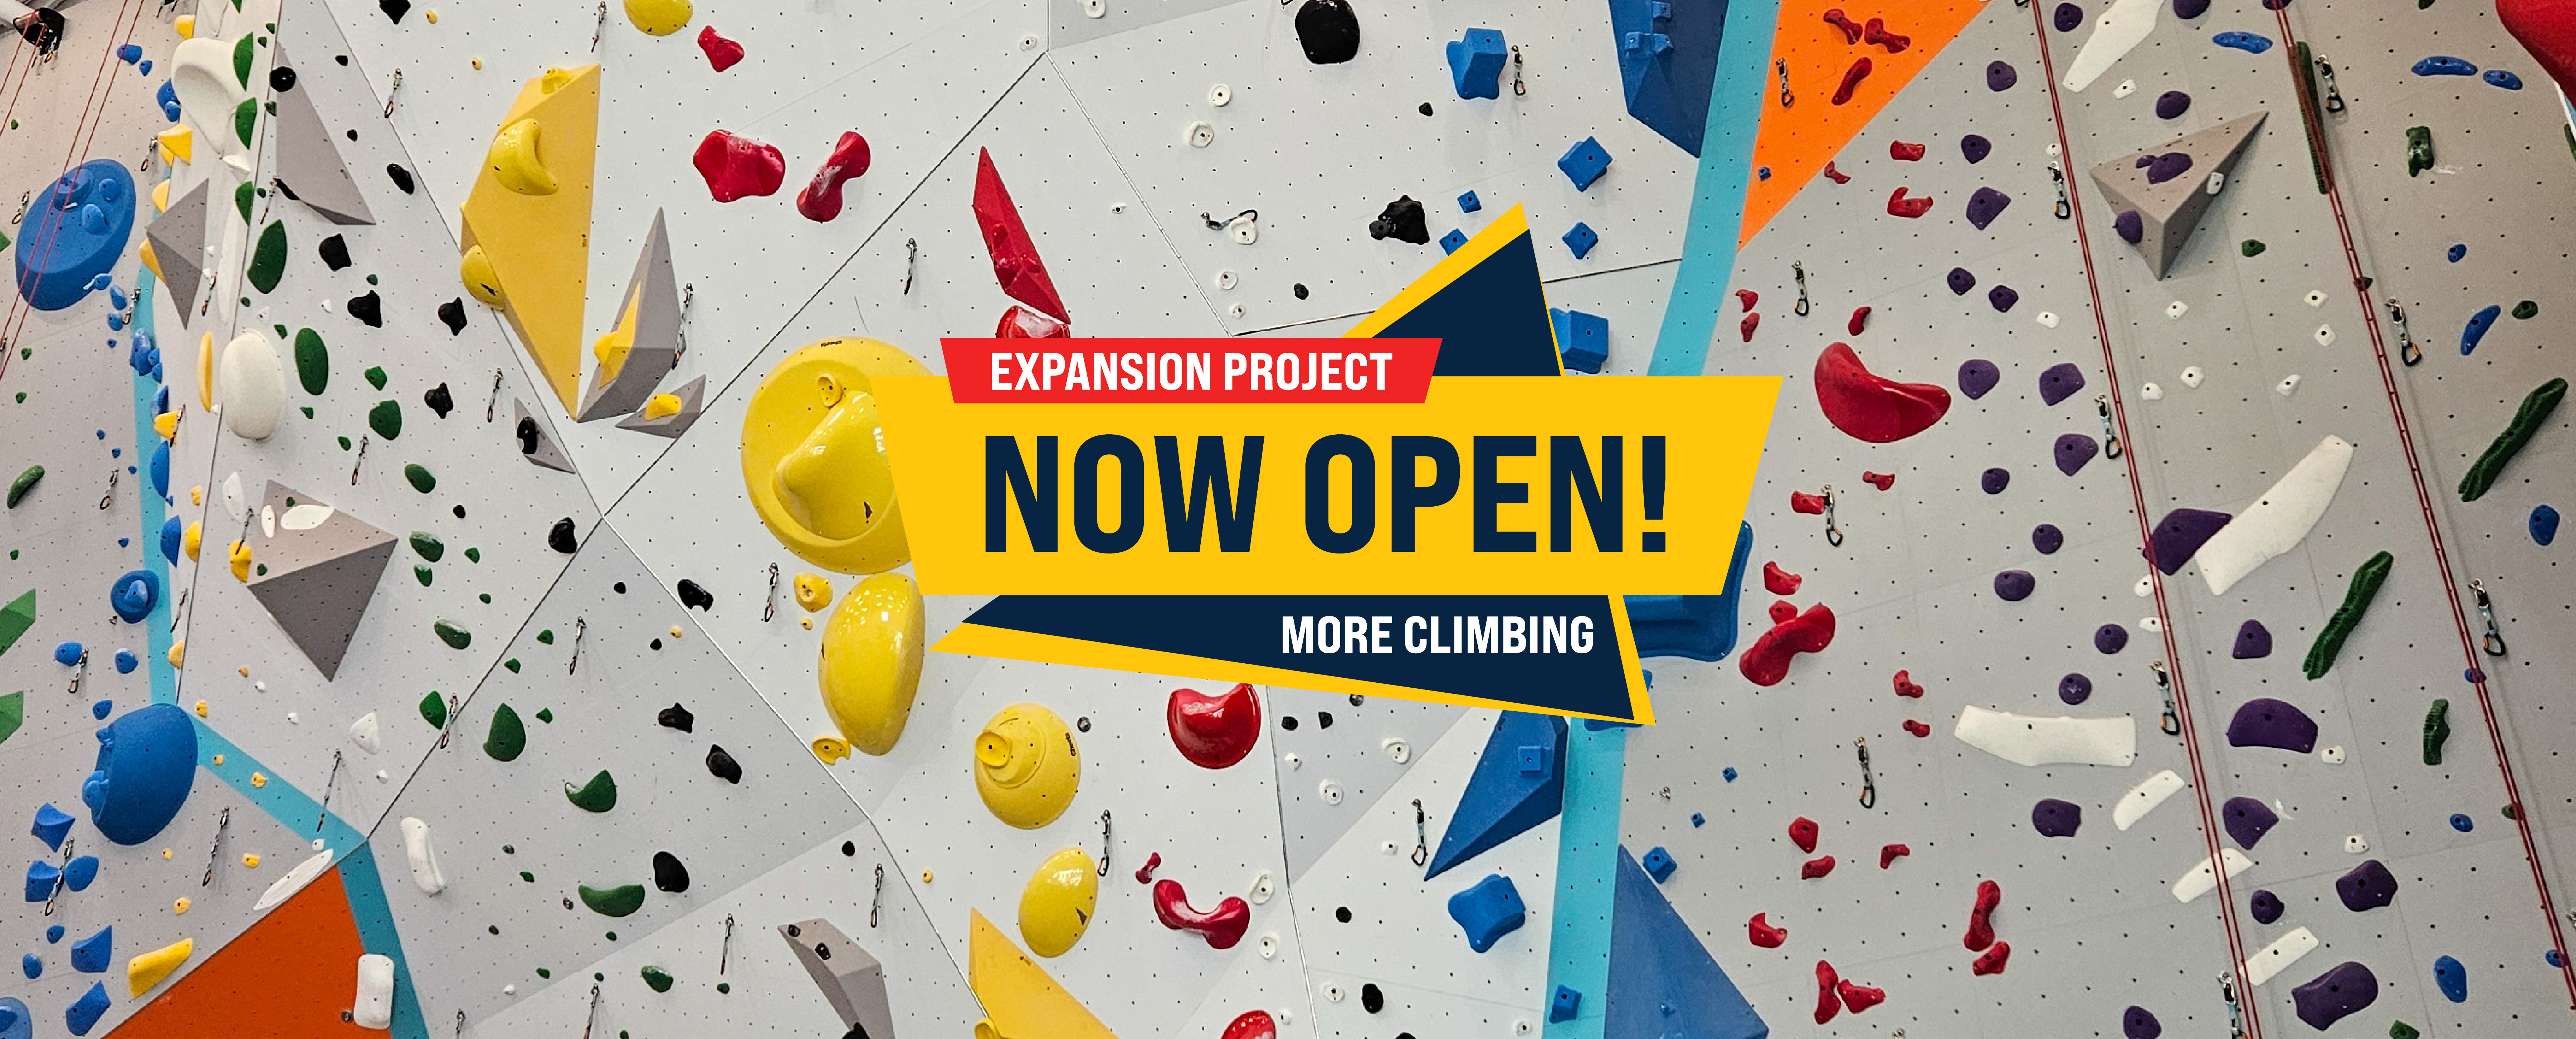 expansion project now open